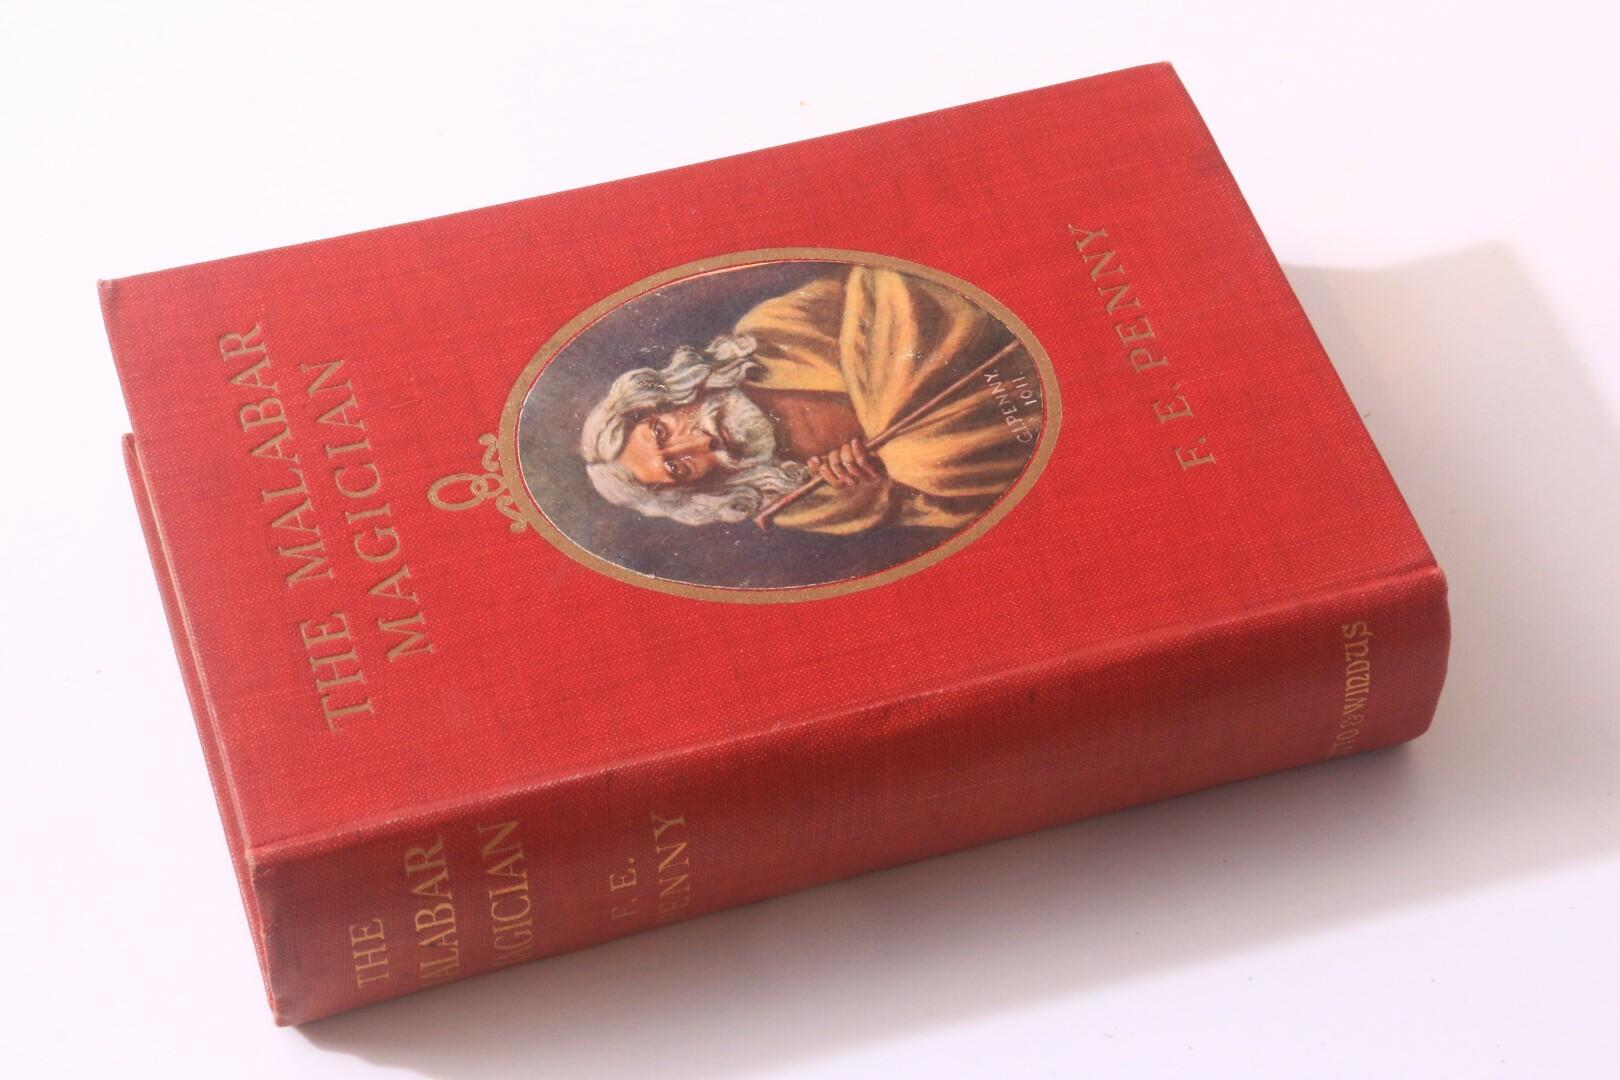 F.E. Penny - The Malabar Magician - Chatto & Windus, 1912, First Edition.